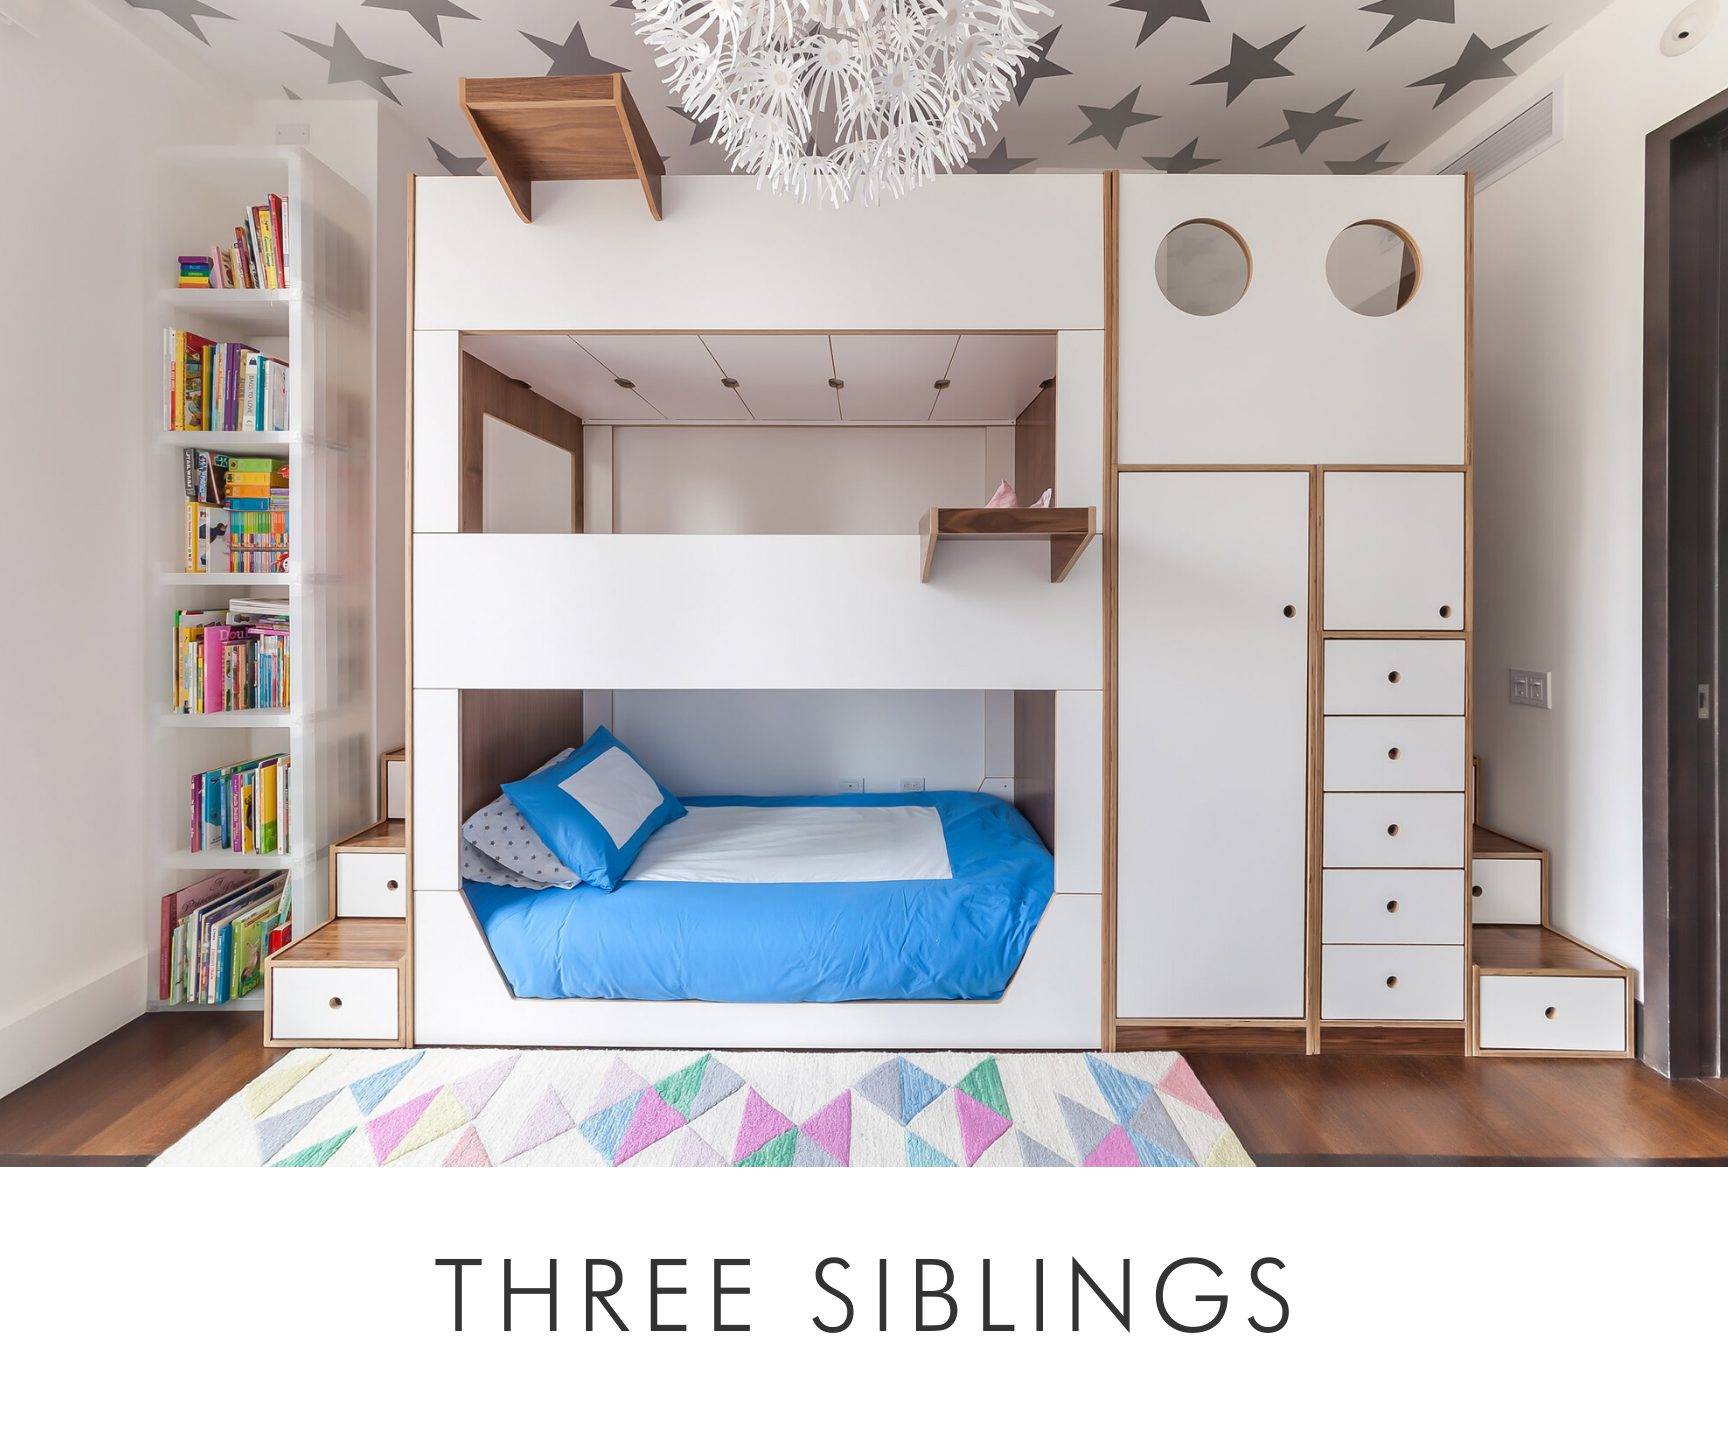 Three siblings creative children's room with stacked beds, starry ceiling, geometric rug, and bookshelf.